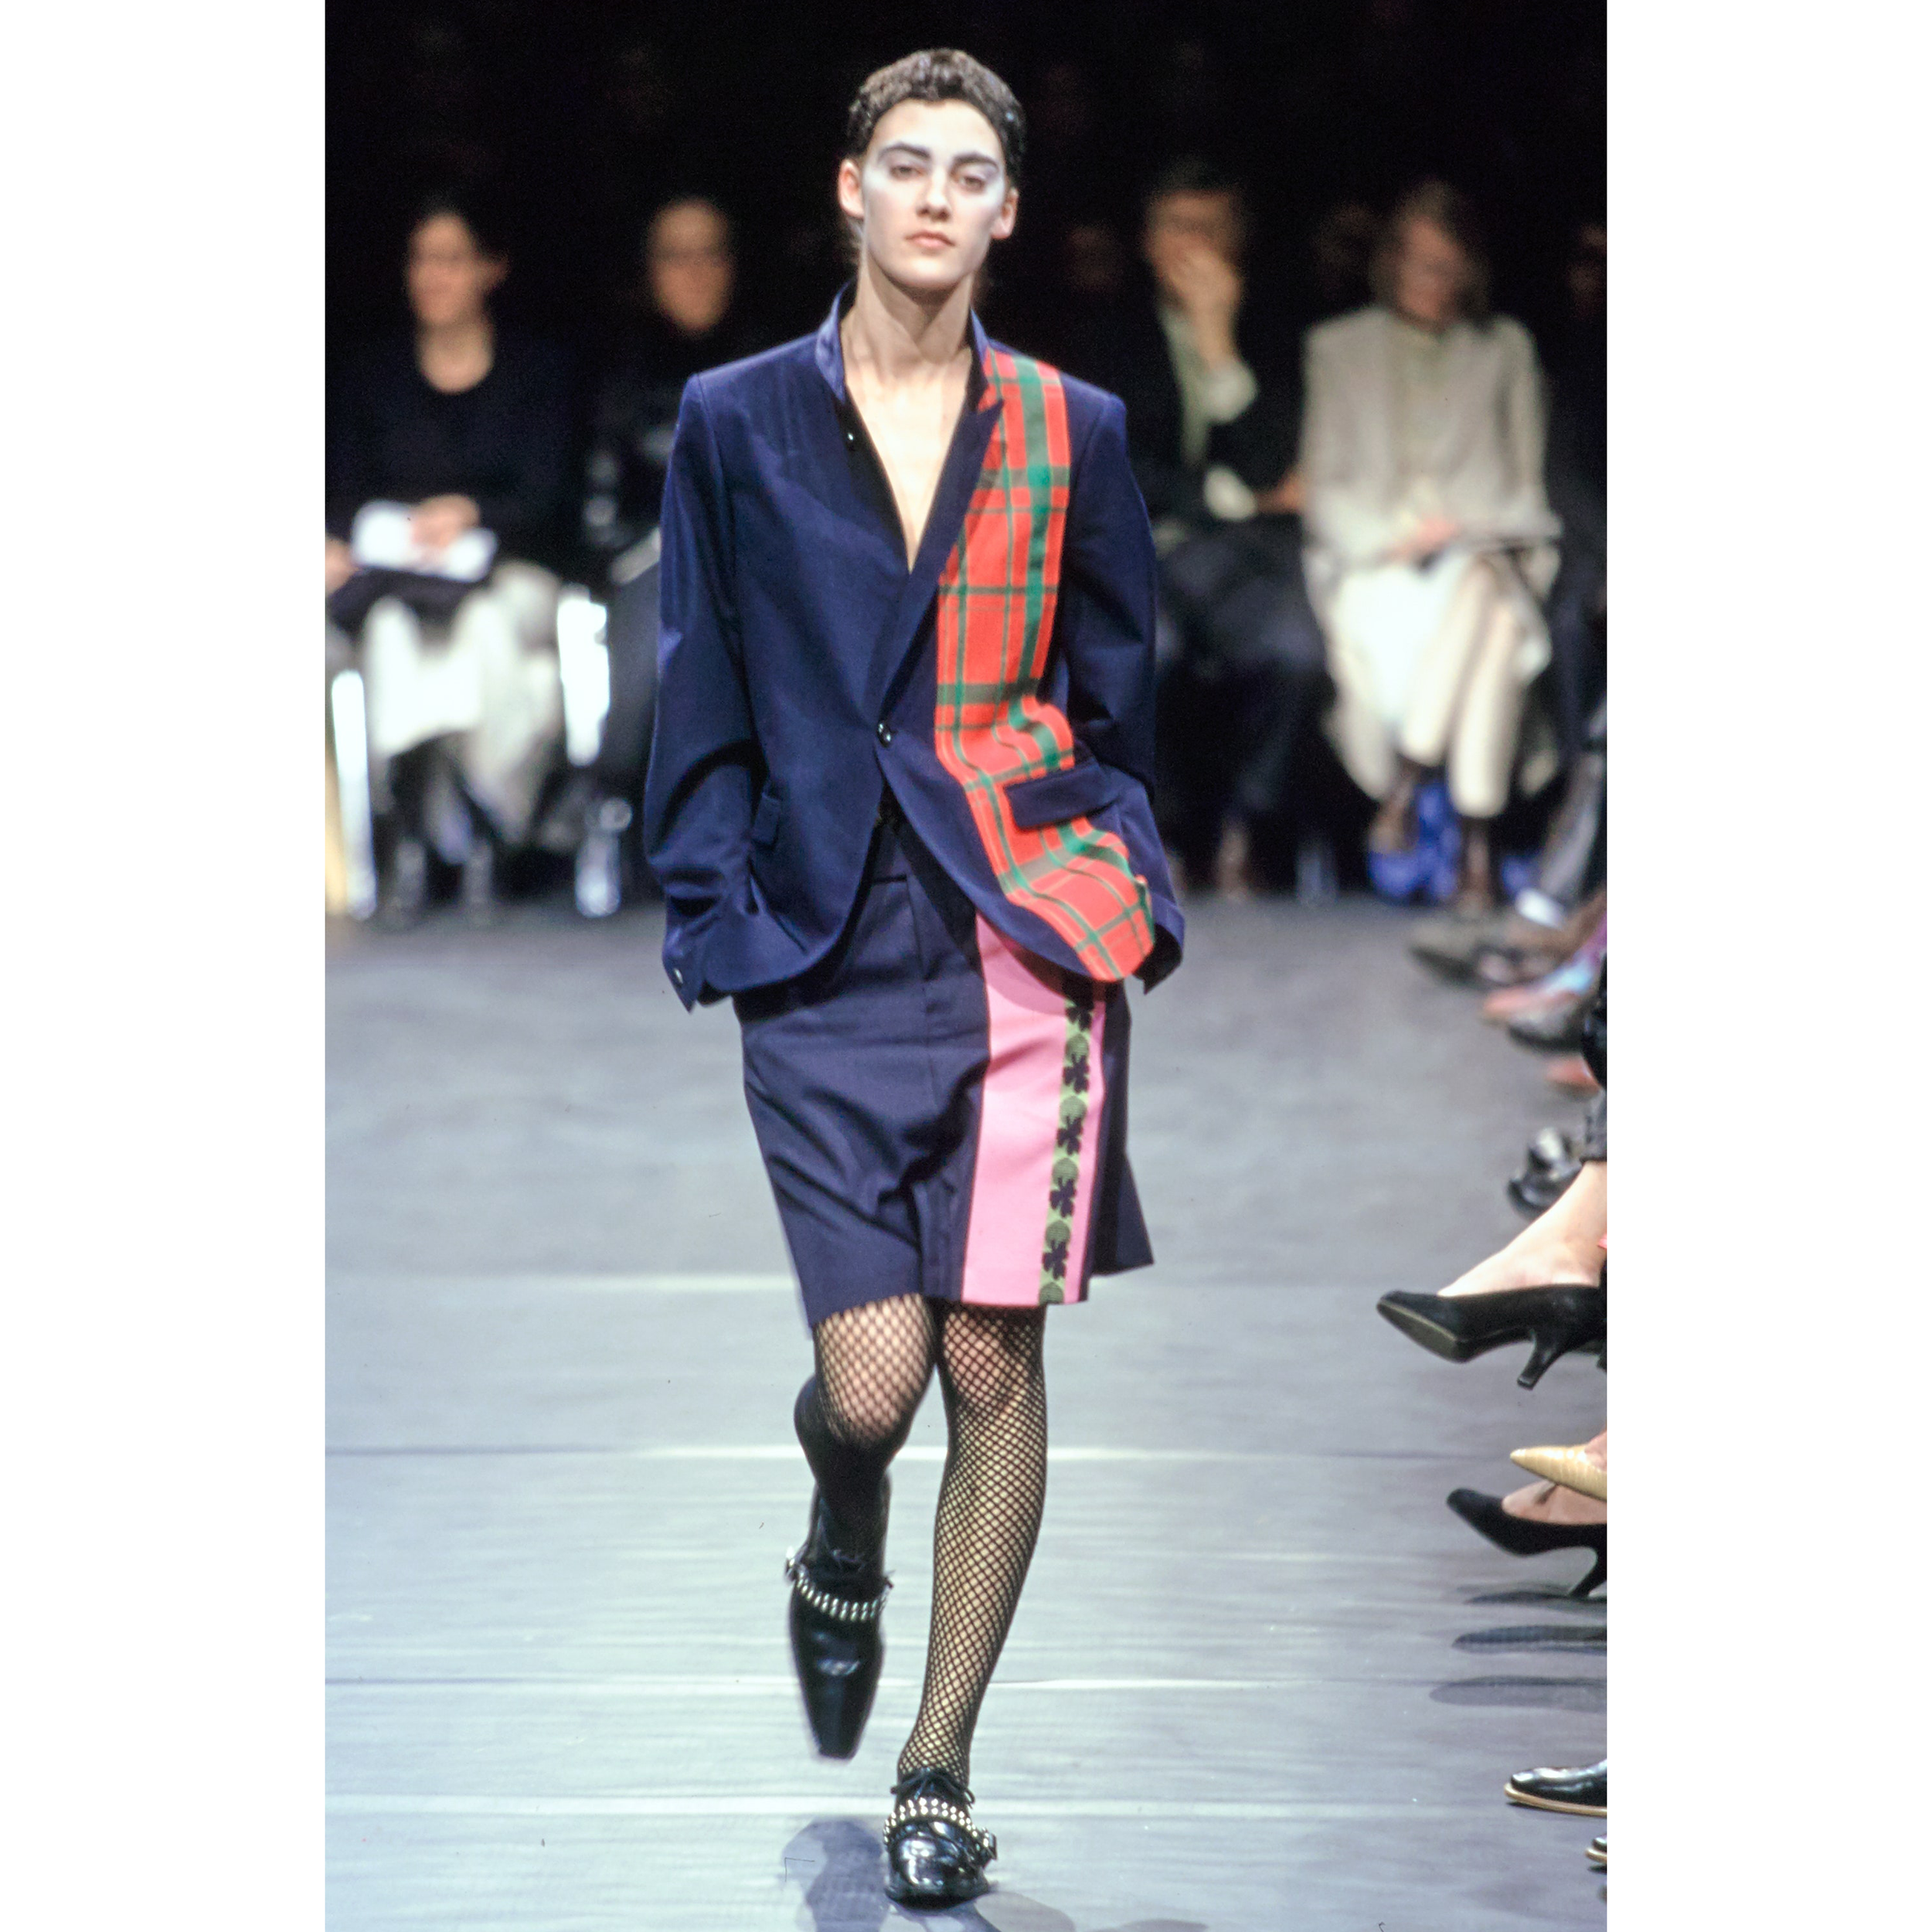 COMME-DES-GARCONS-FALL-2000-RTW-46-MIA-HESSNER-CN10042369.png